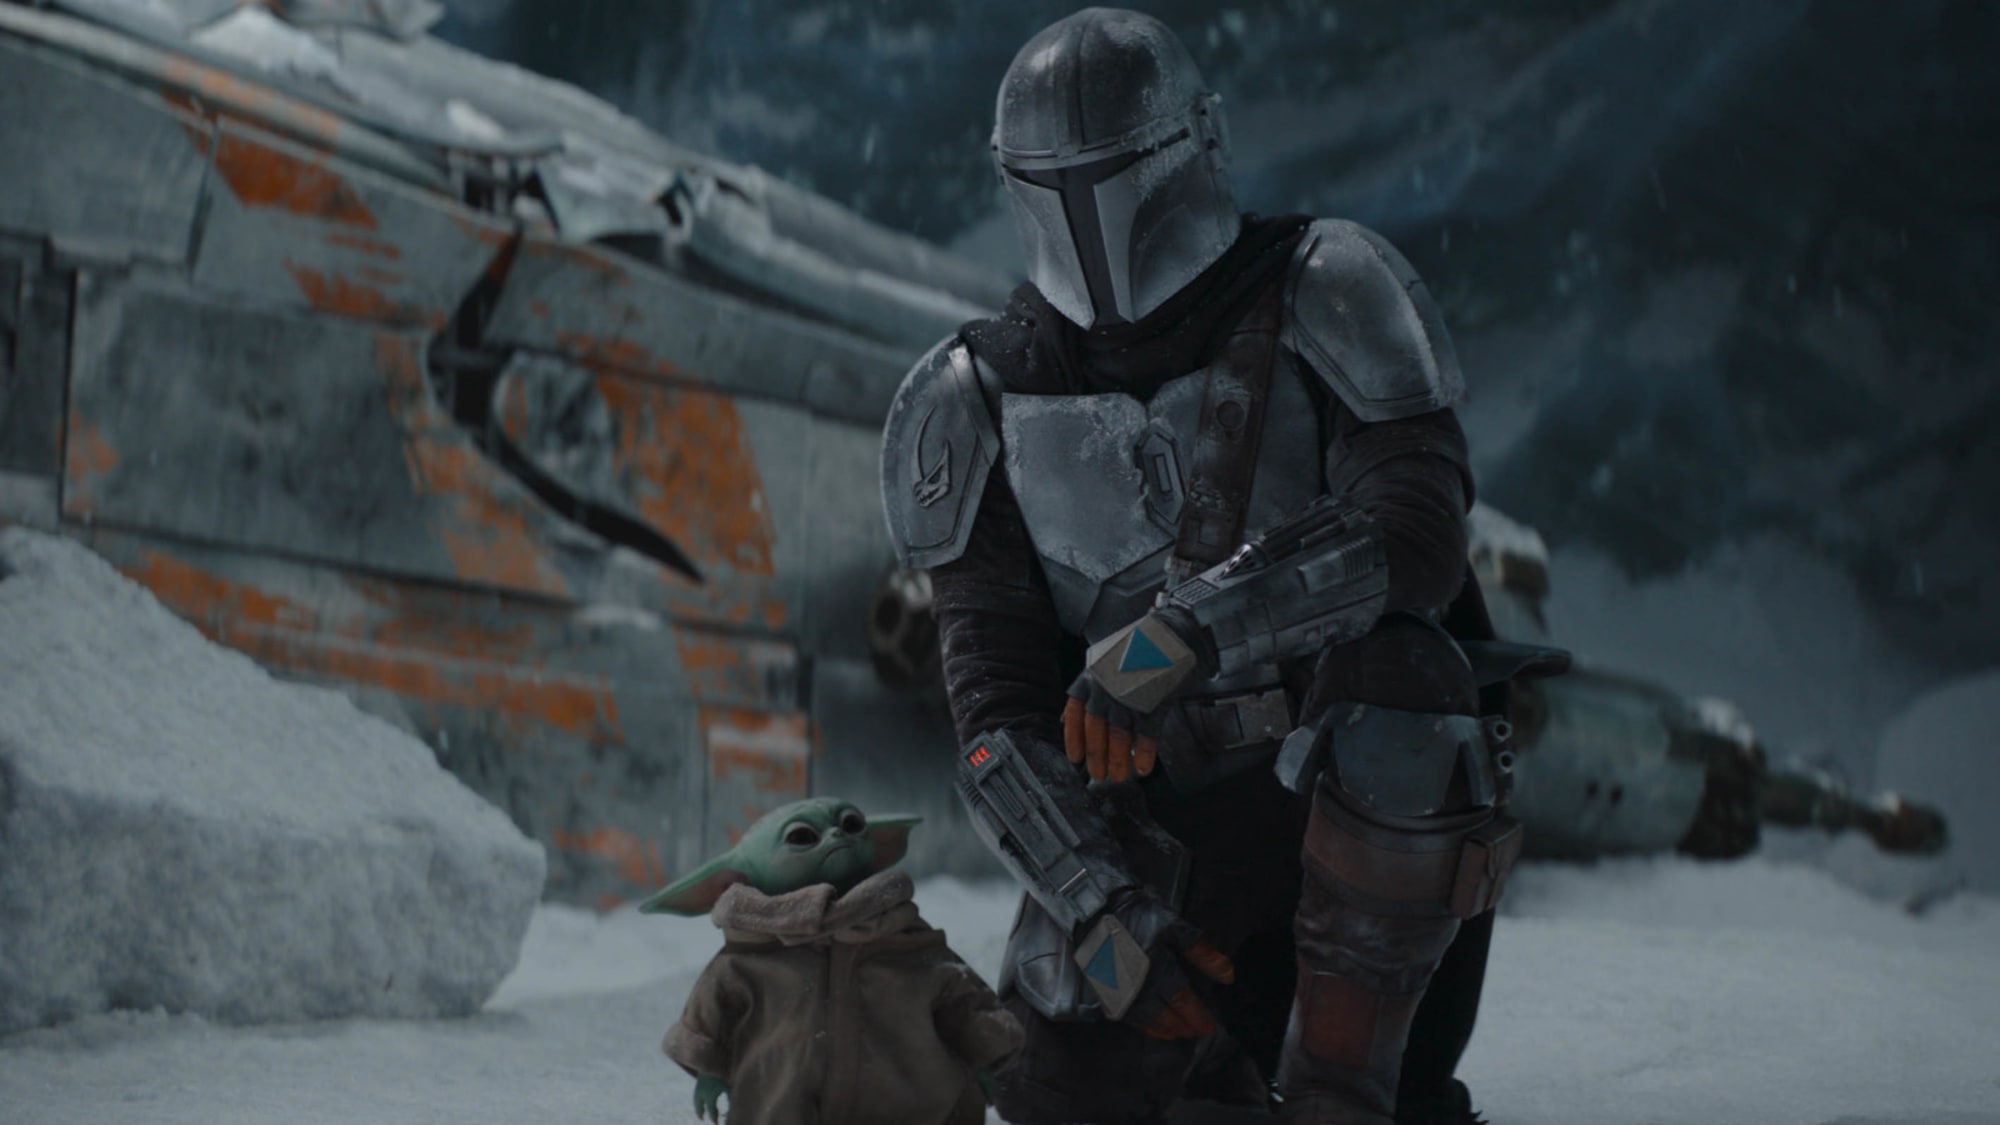 4 things The Mandalorian must get right to avoid a sophomore slump